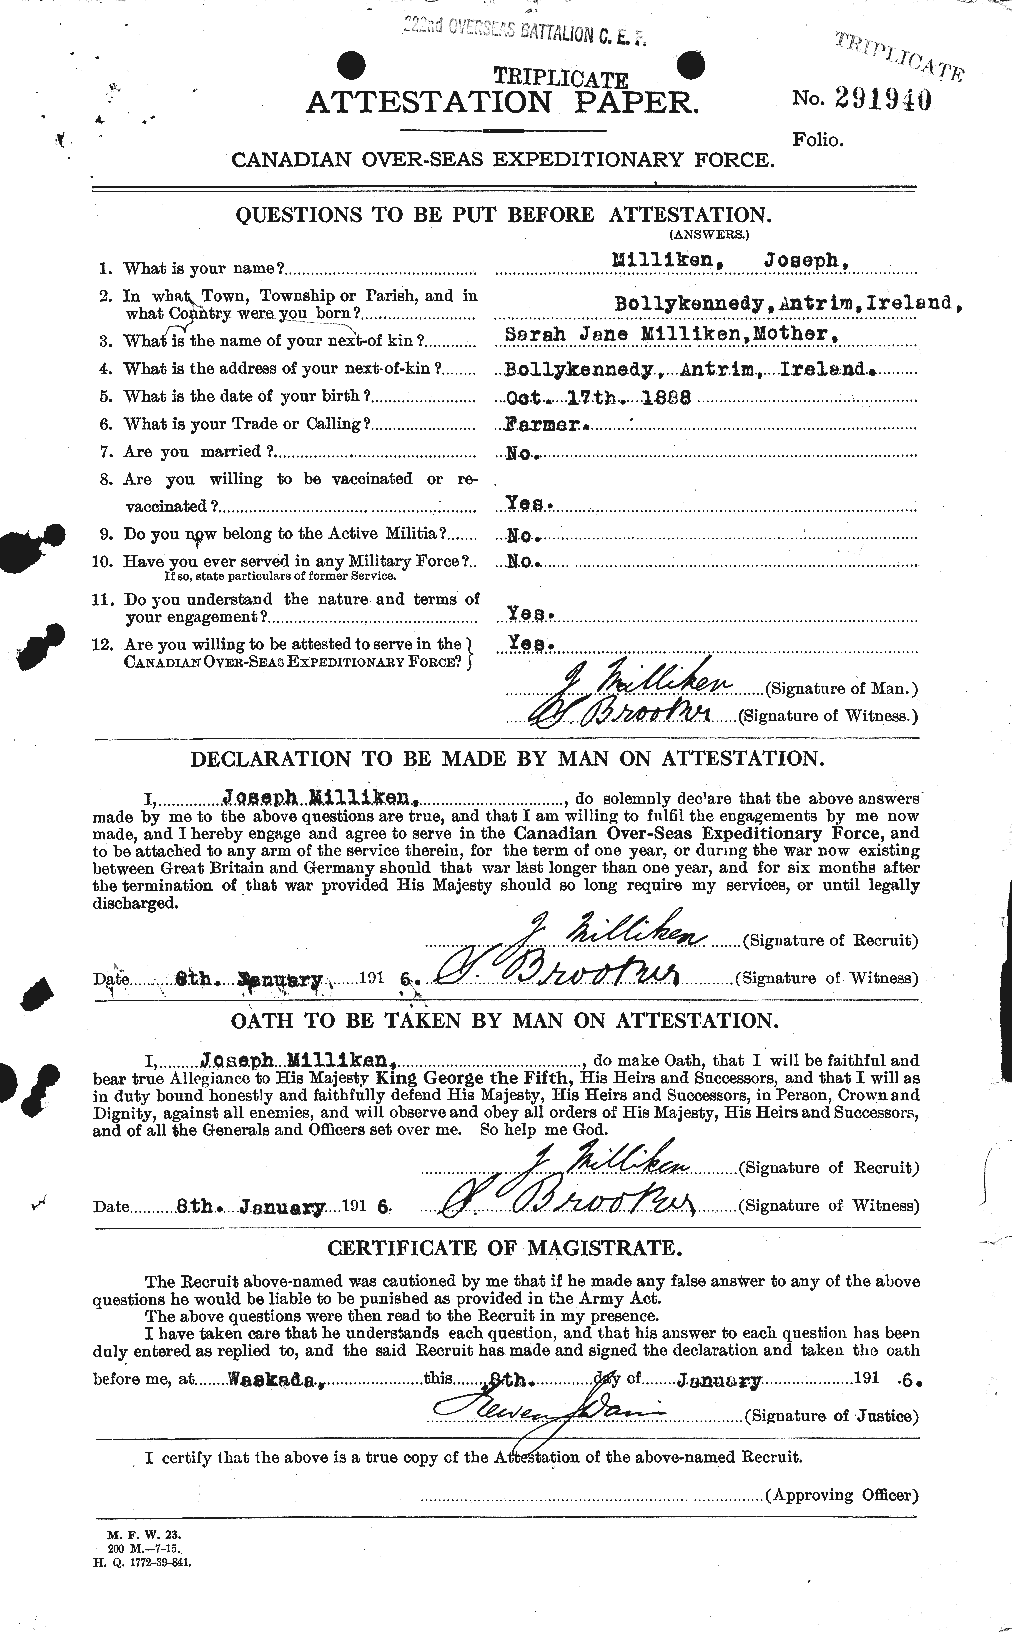 Personnel Records of the First World War - CEF 496372a